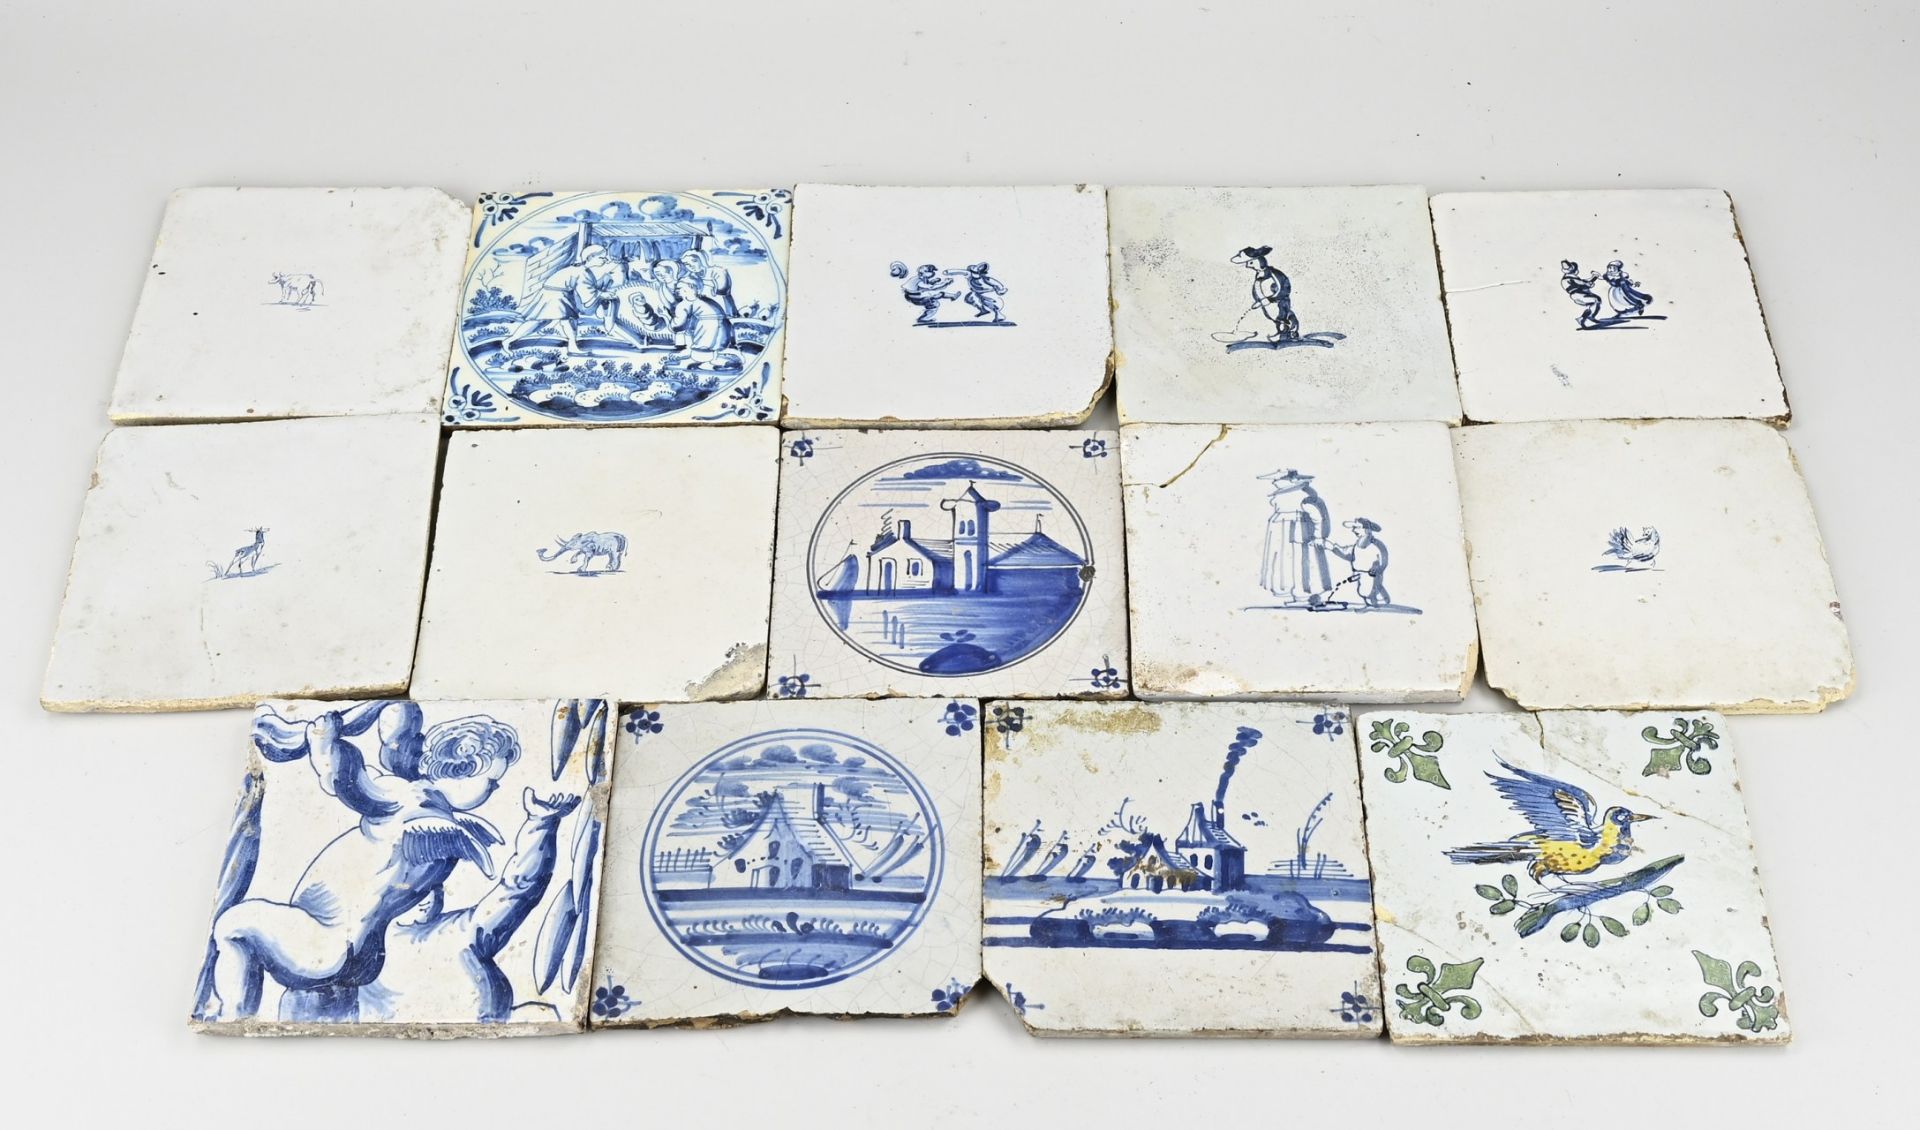 Lot of interesting wall tiles (14x)